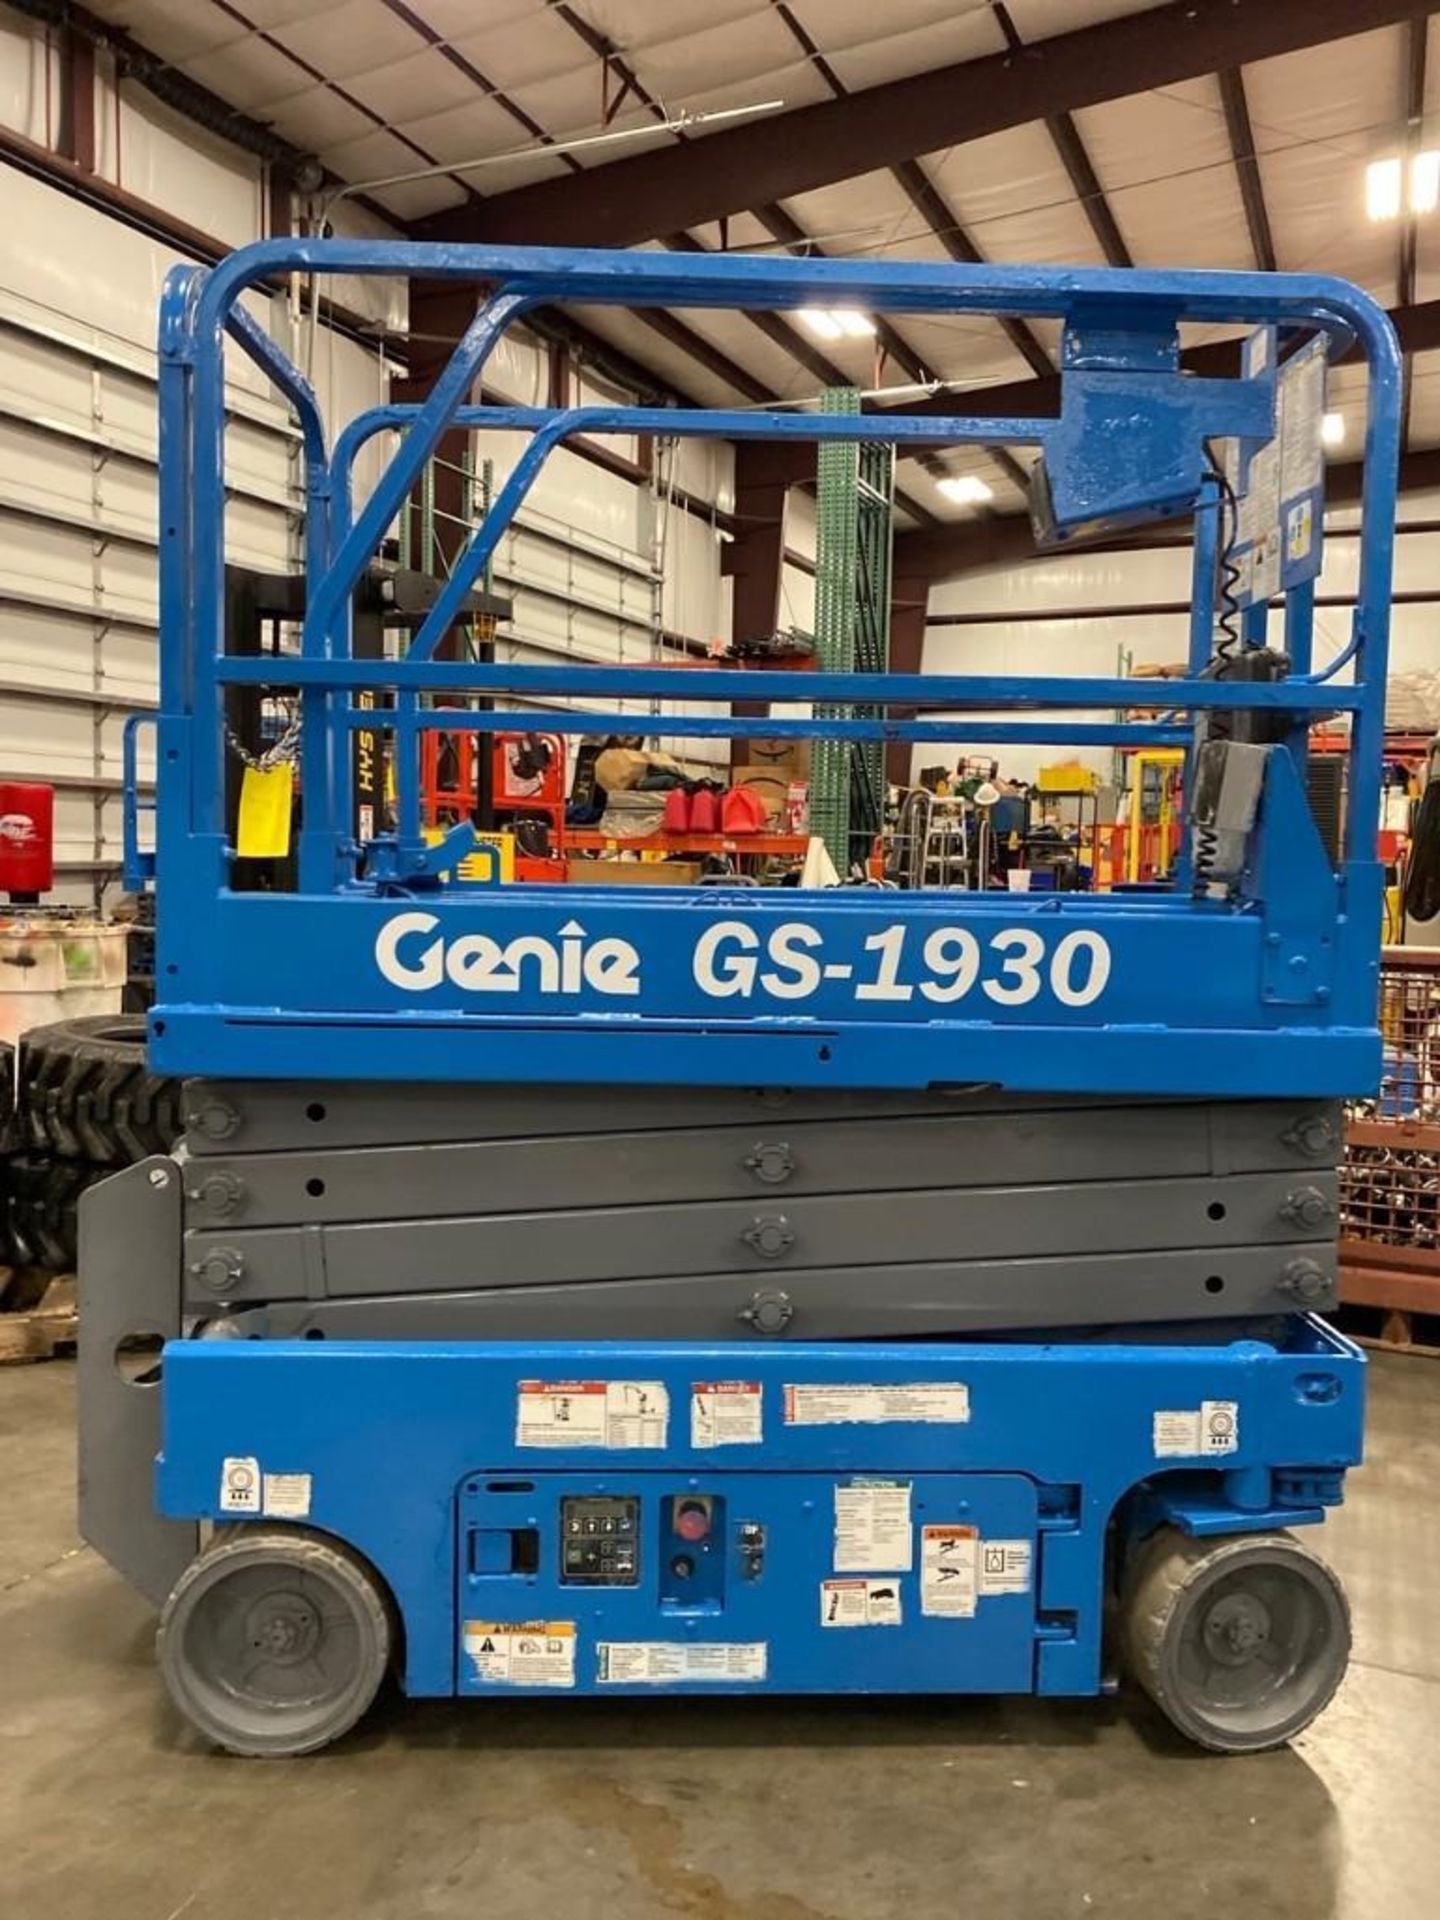 2013 GENIE GS-1930 ELECTRIC SCISSOR LIFT, SELF PROPELLED, 19' PLATFORM HEIGHT, BUILT IN BATTERY CHAR - Image 5 of 7